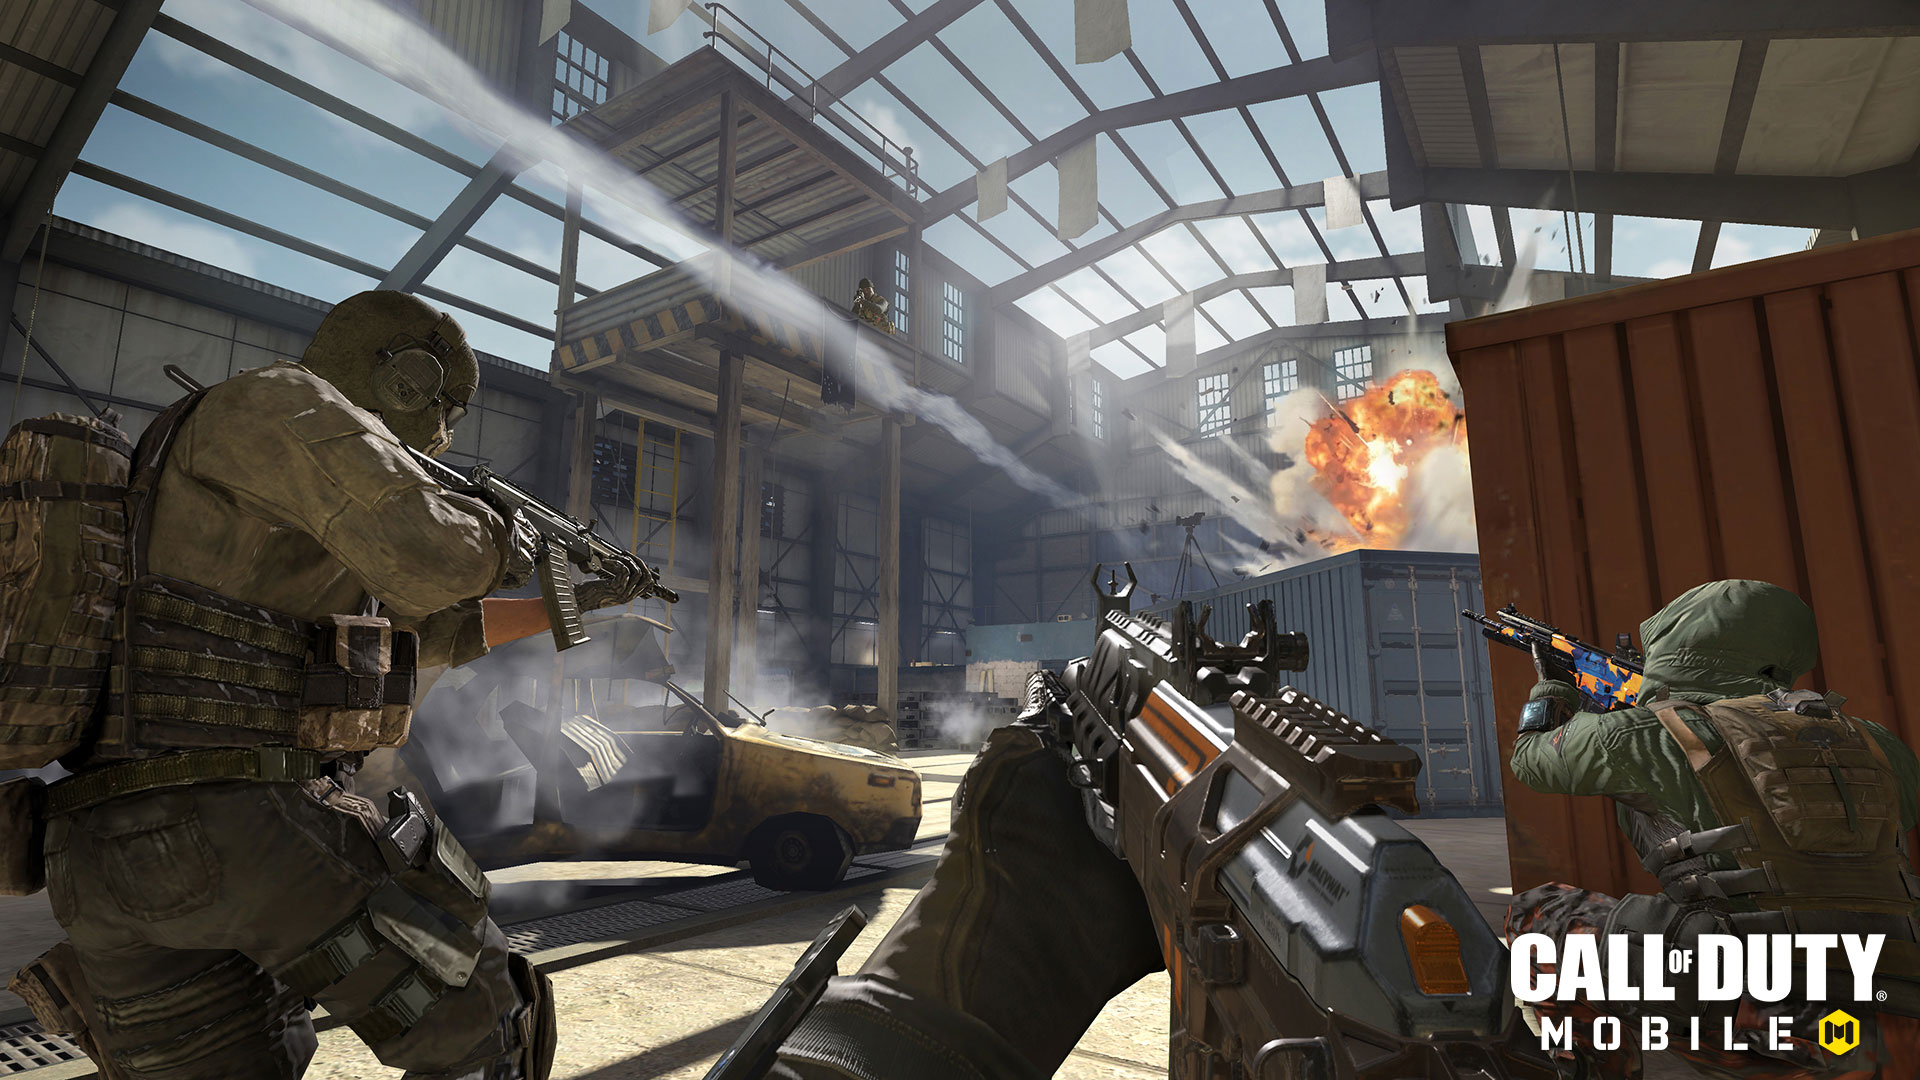 Multiplayer - Call of Duty: Mobile Guide - IGN